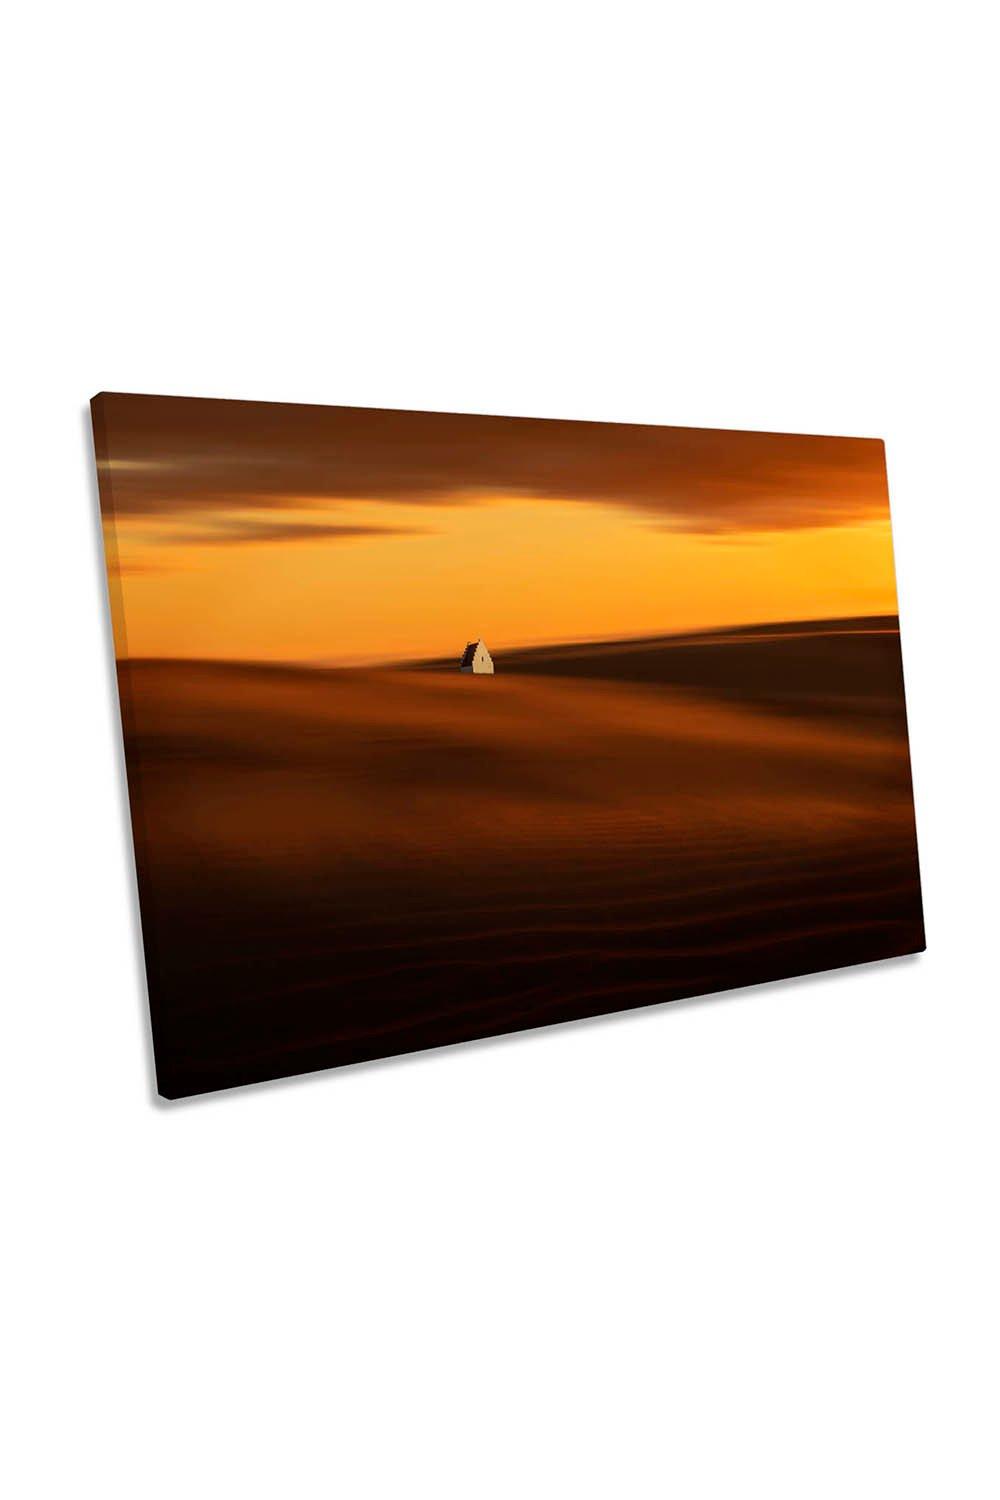 Church on the Orange Dunes Minimalistic Canvas Wall Art Picture Print